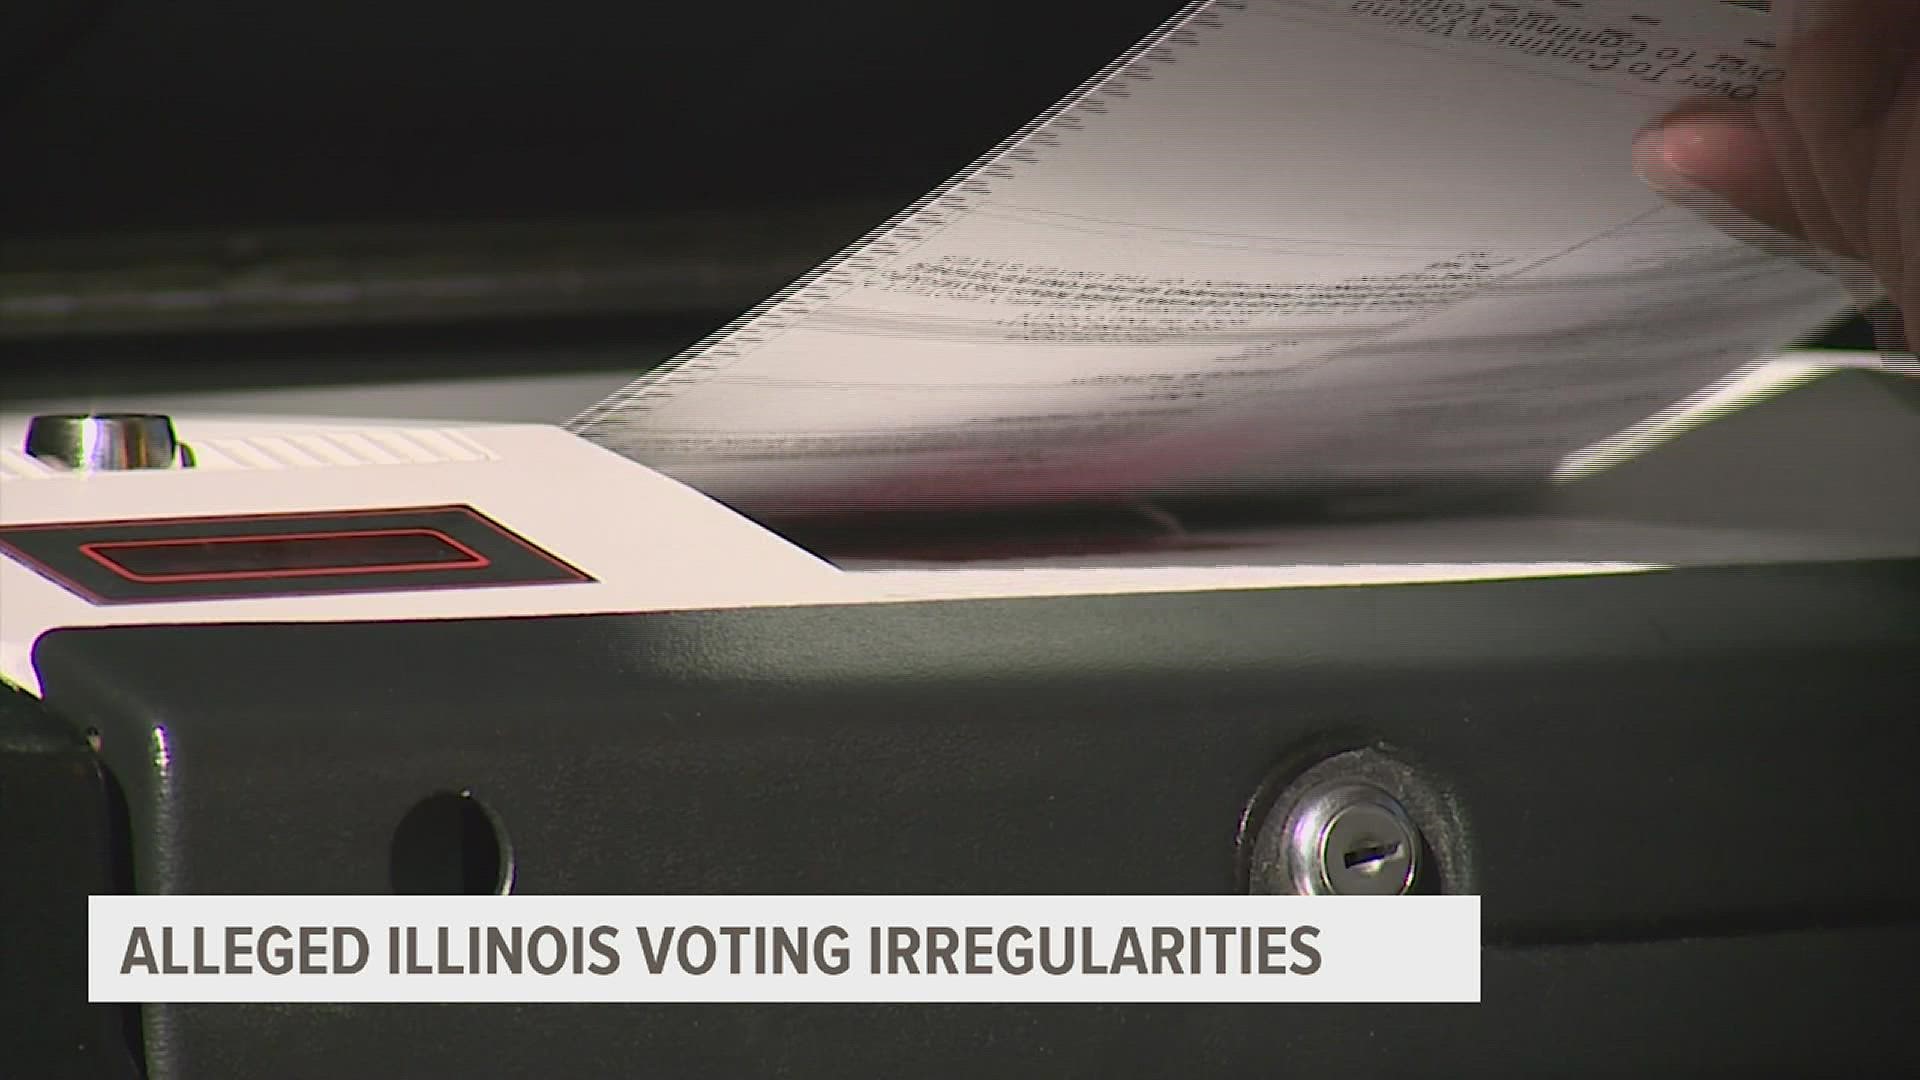 The Illinois Freedom Alliance, a conservative group, says that it found over 100 instances of voting "irregularities" in RICO, which officials say is untrue.